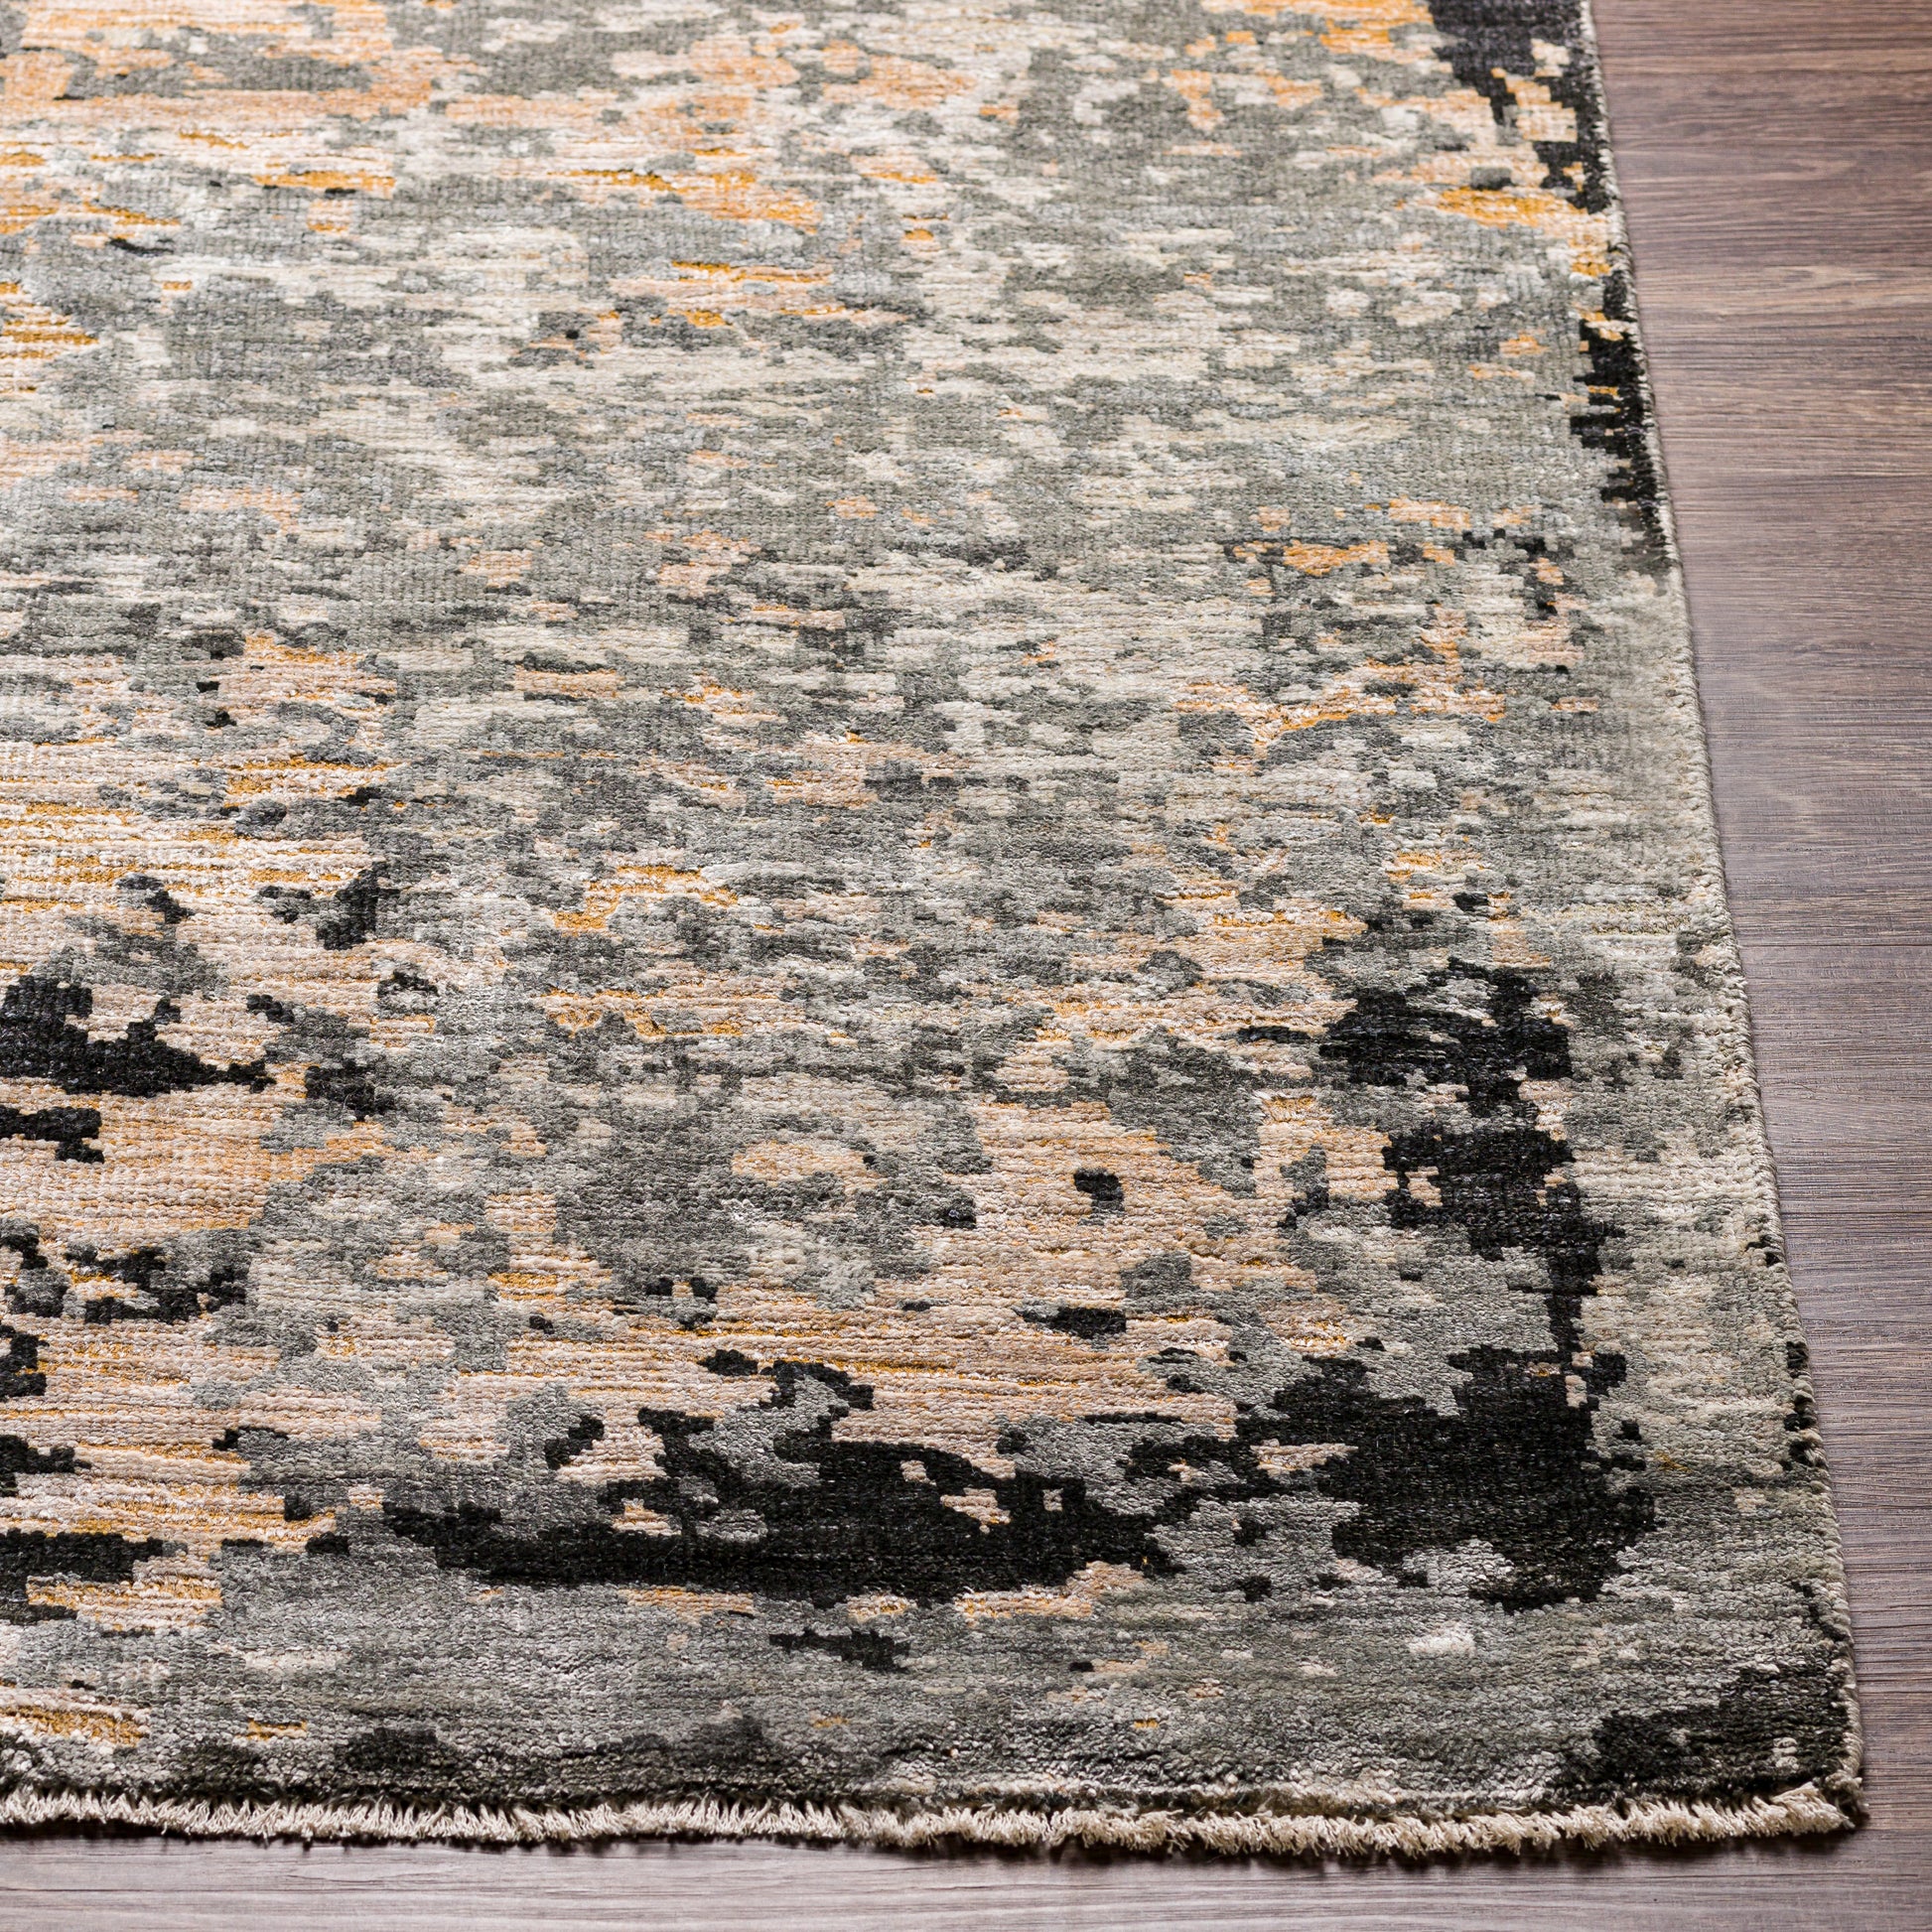 Surya Ocean Oce-2300 Taupe, Light Gray, Charcoal, Camel Area Rug